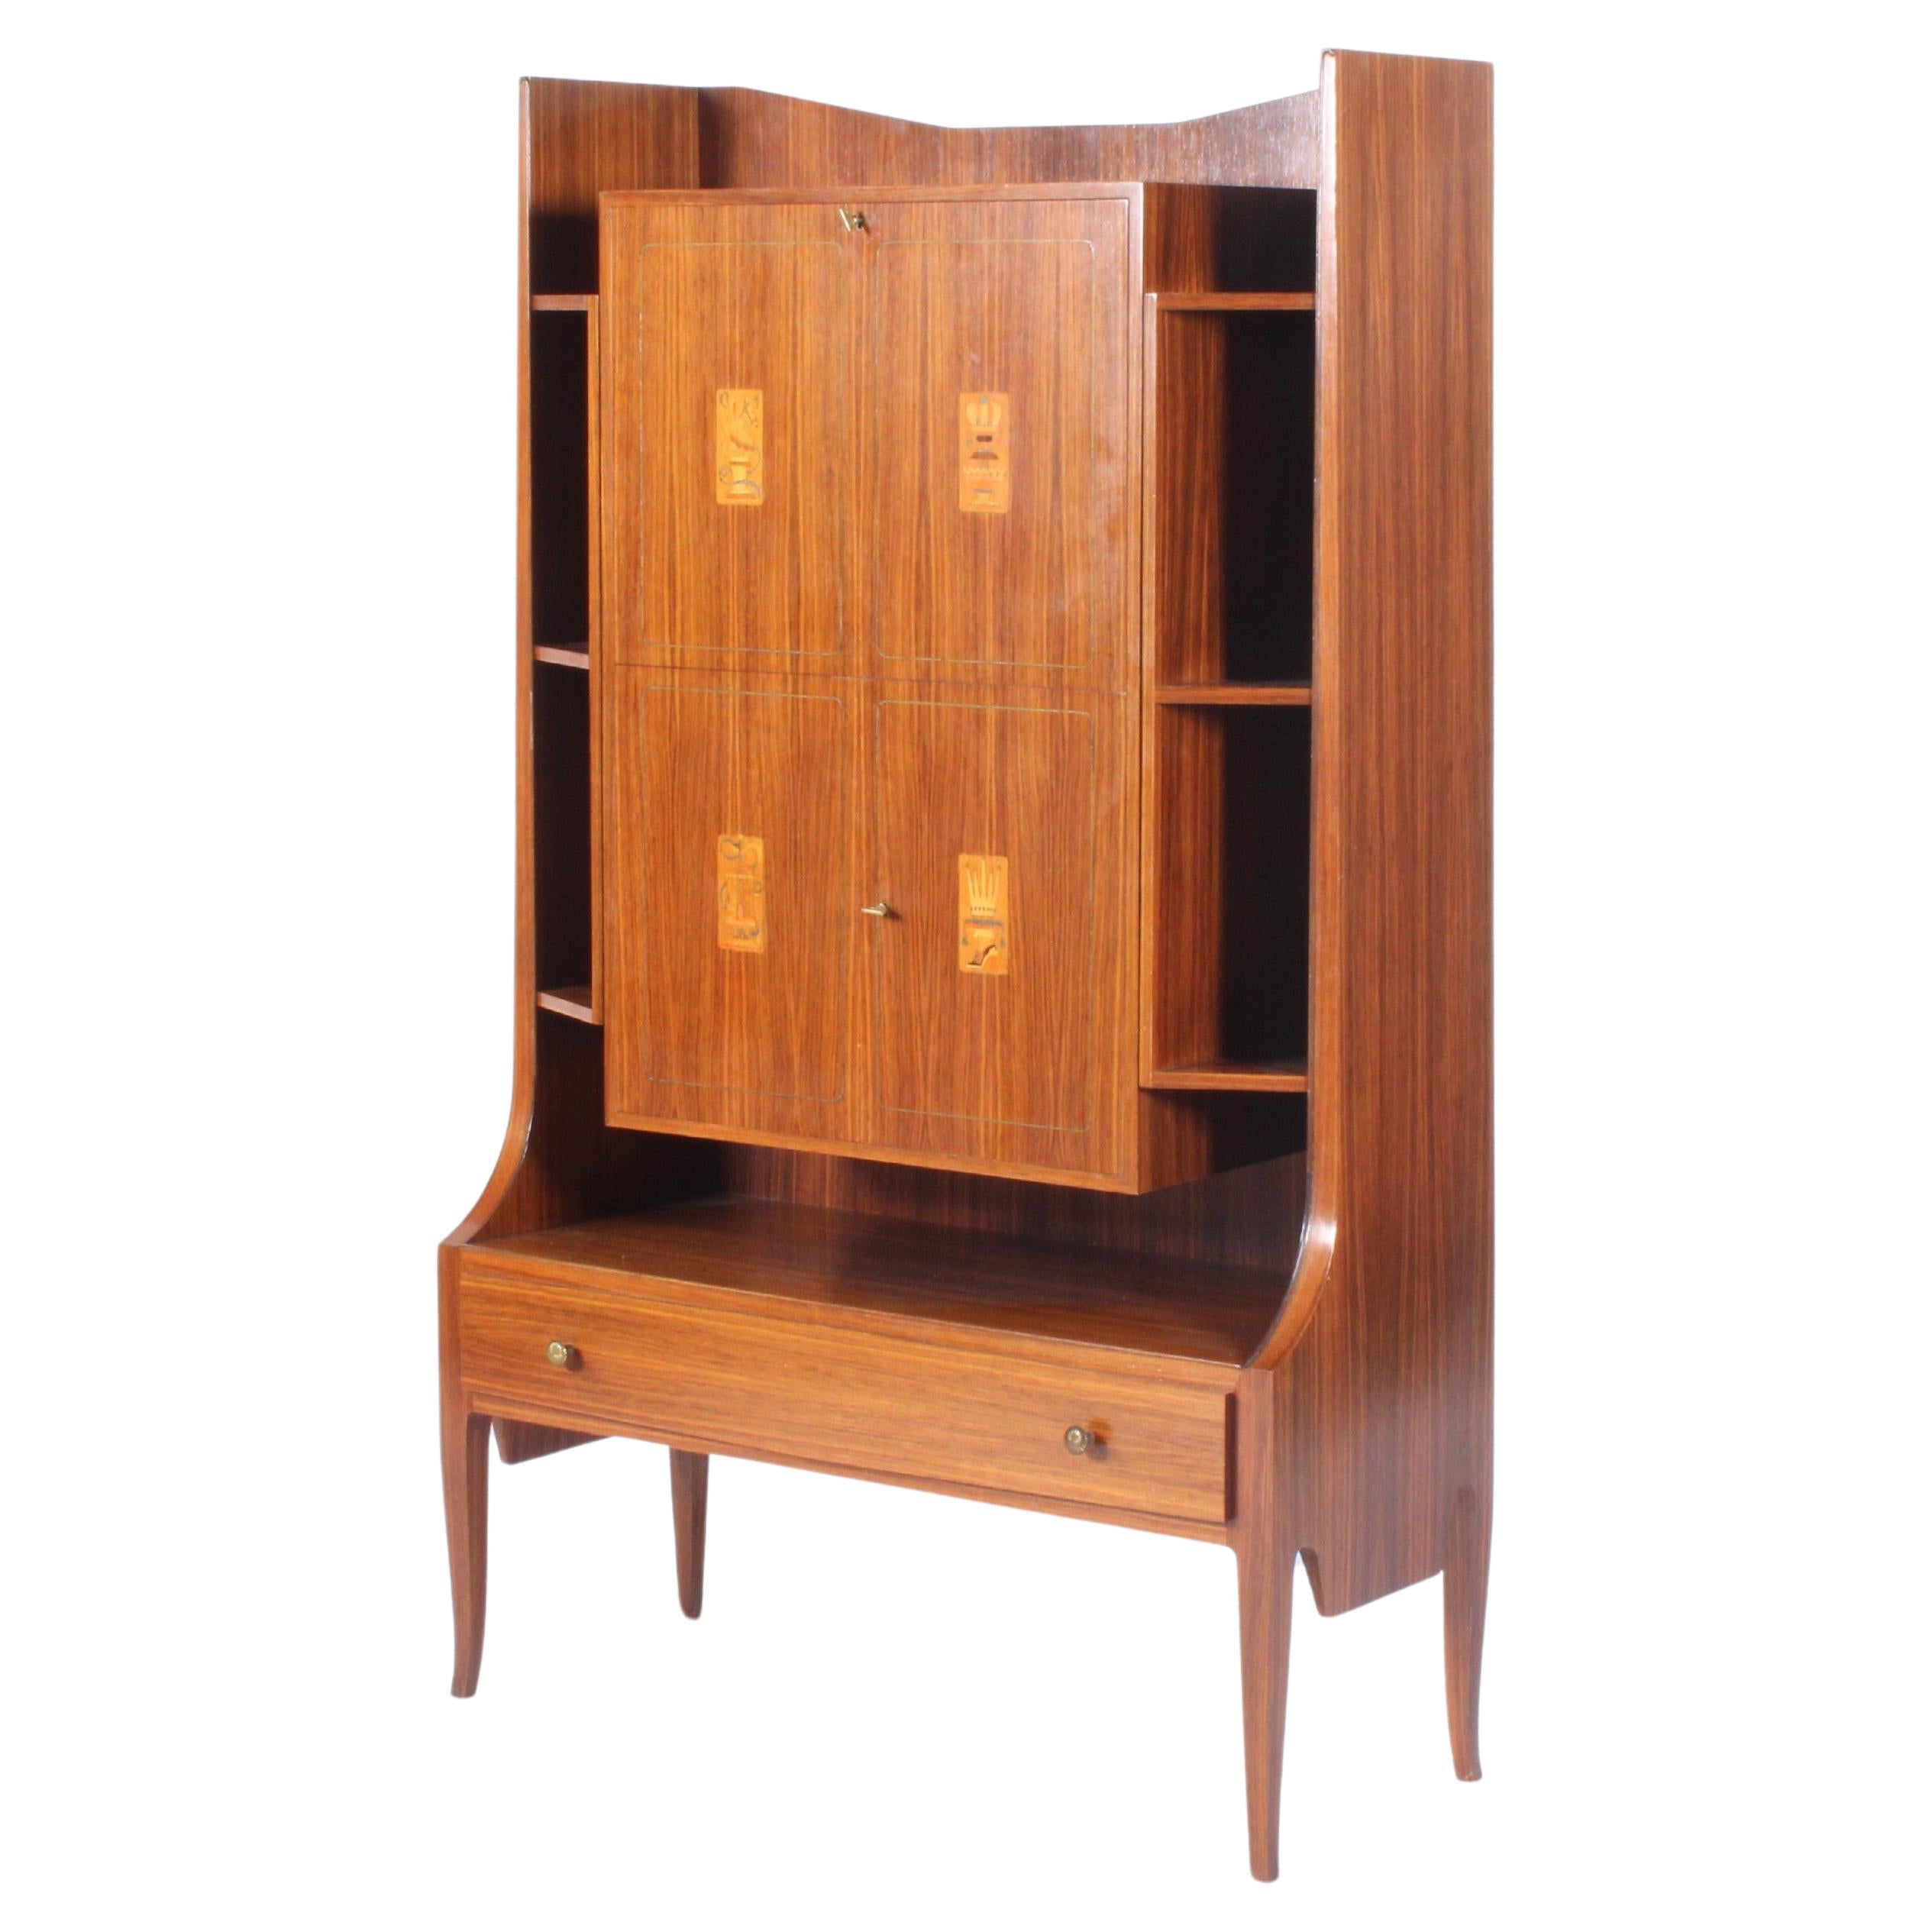 Mid Century Italian Drinks Cabinet With Decorative Marquetry Panels